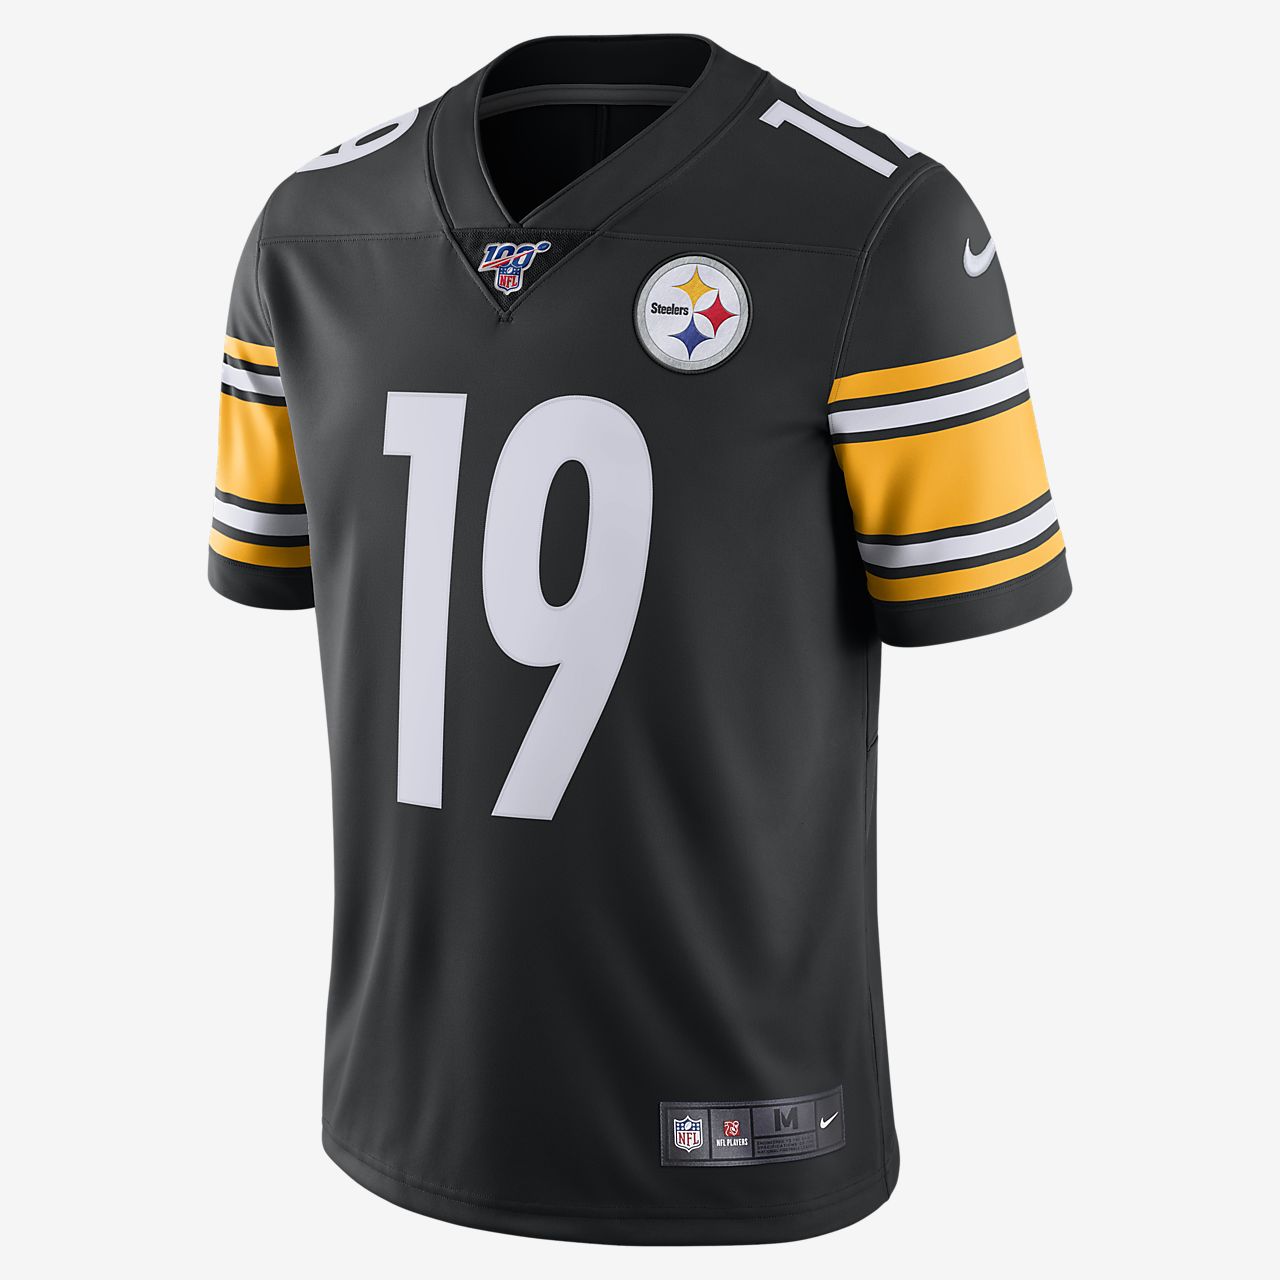 pittsburgh nfl jersey